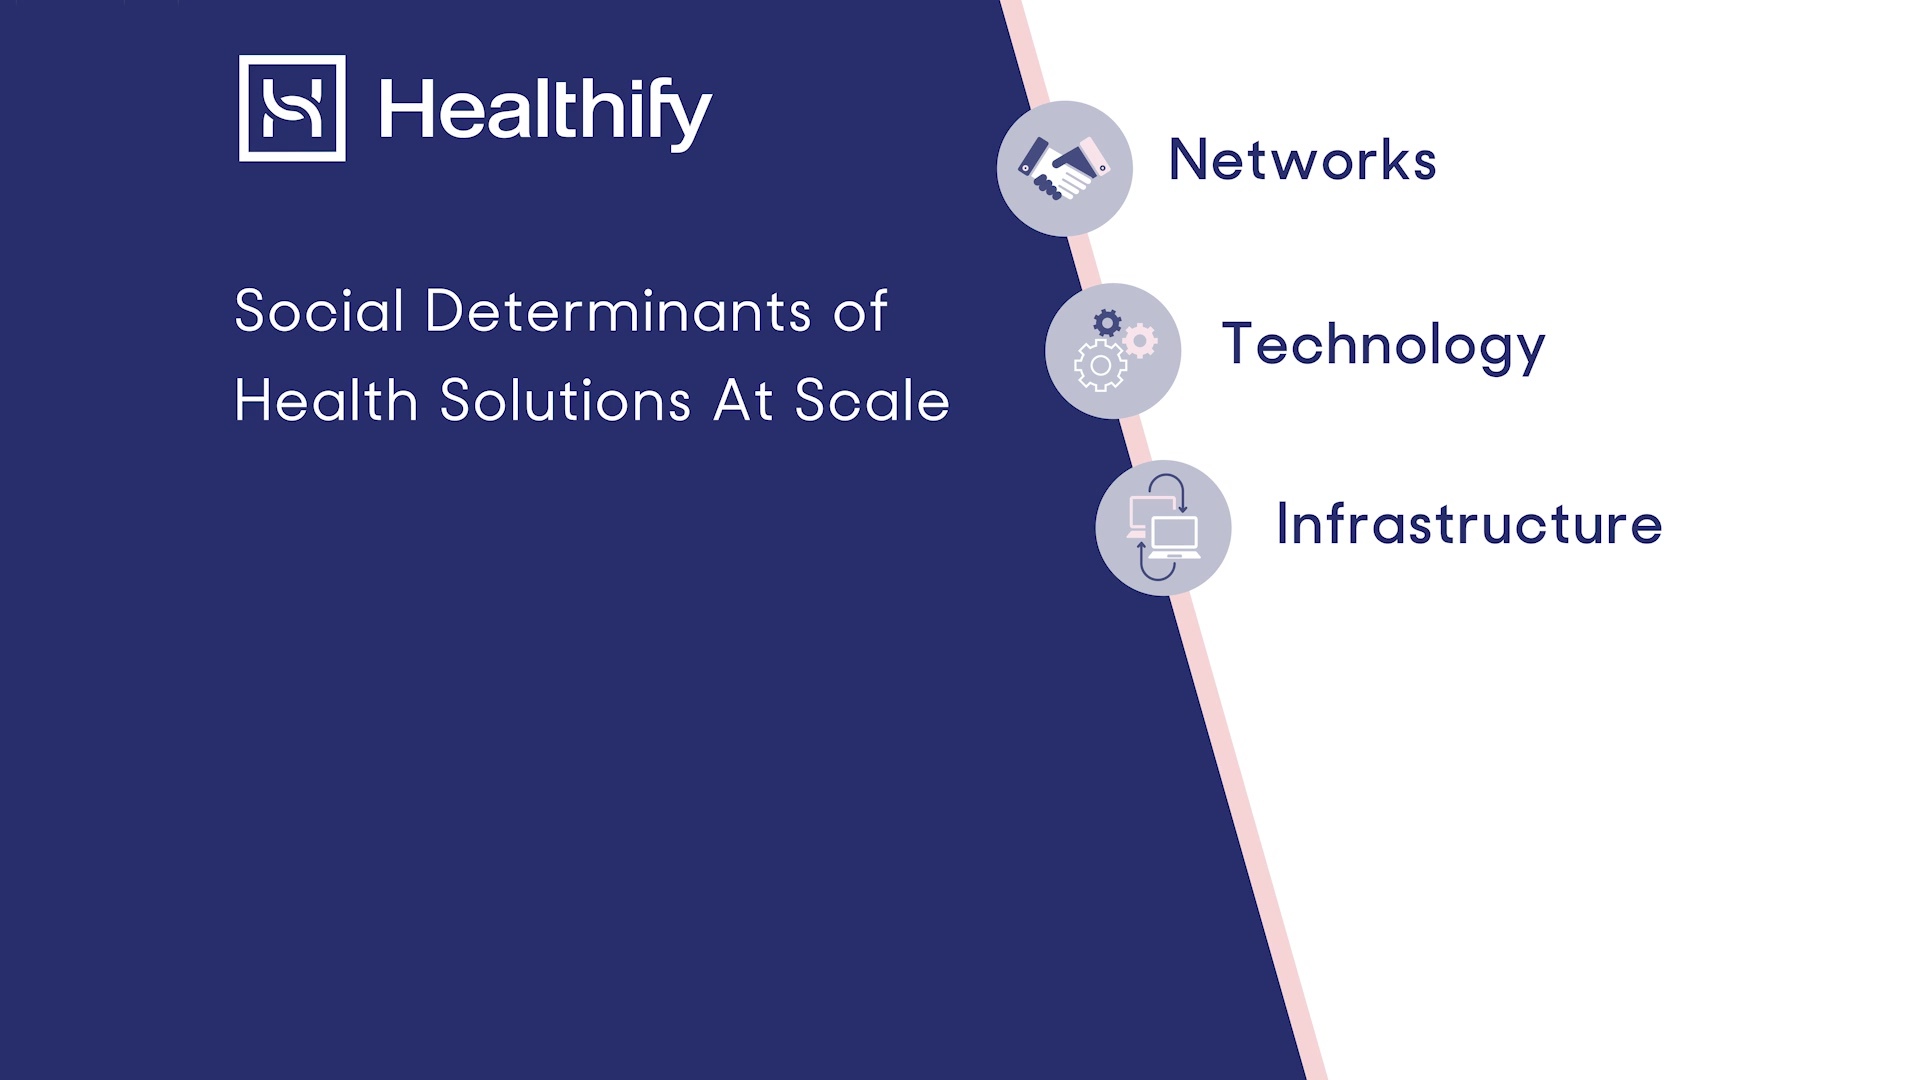 WellSky Acquires Healthify to Enhance Social Determinants of Health